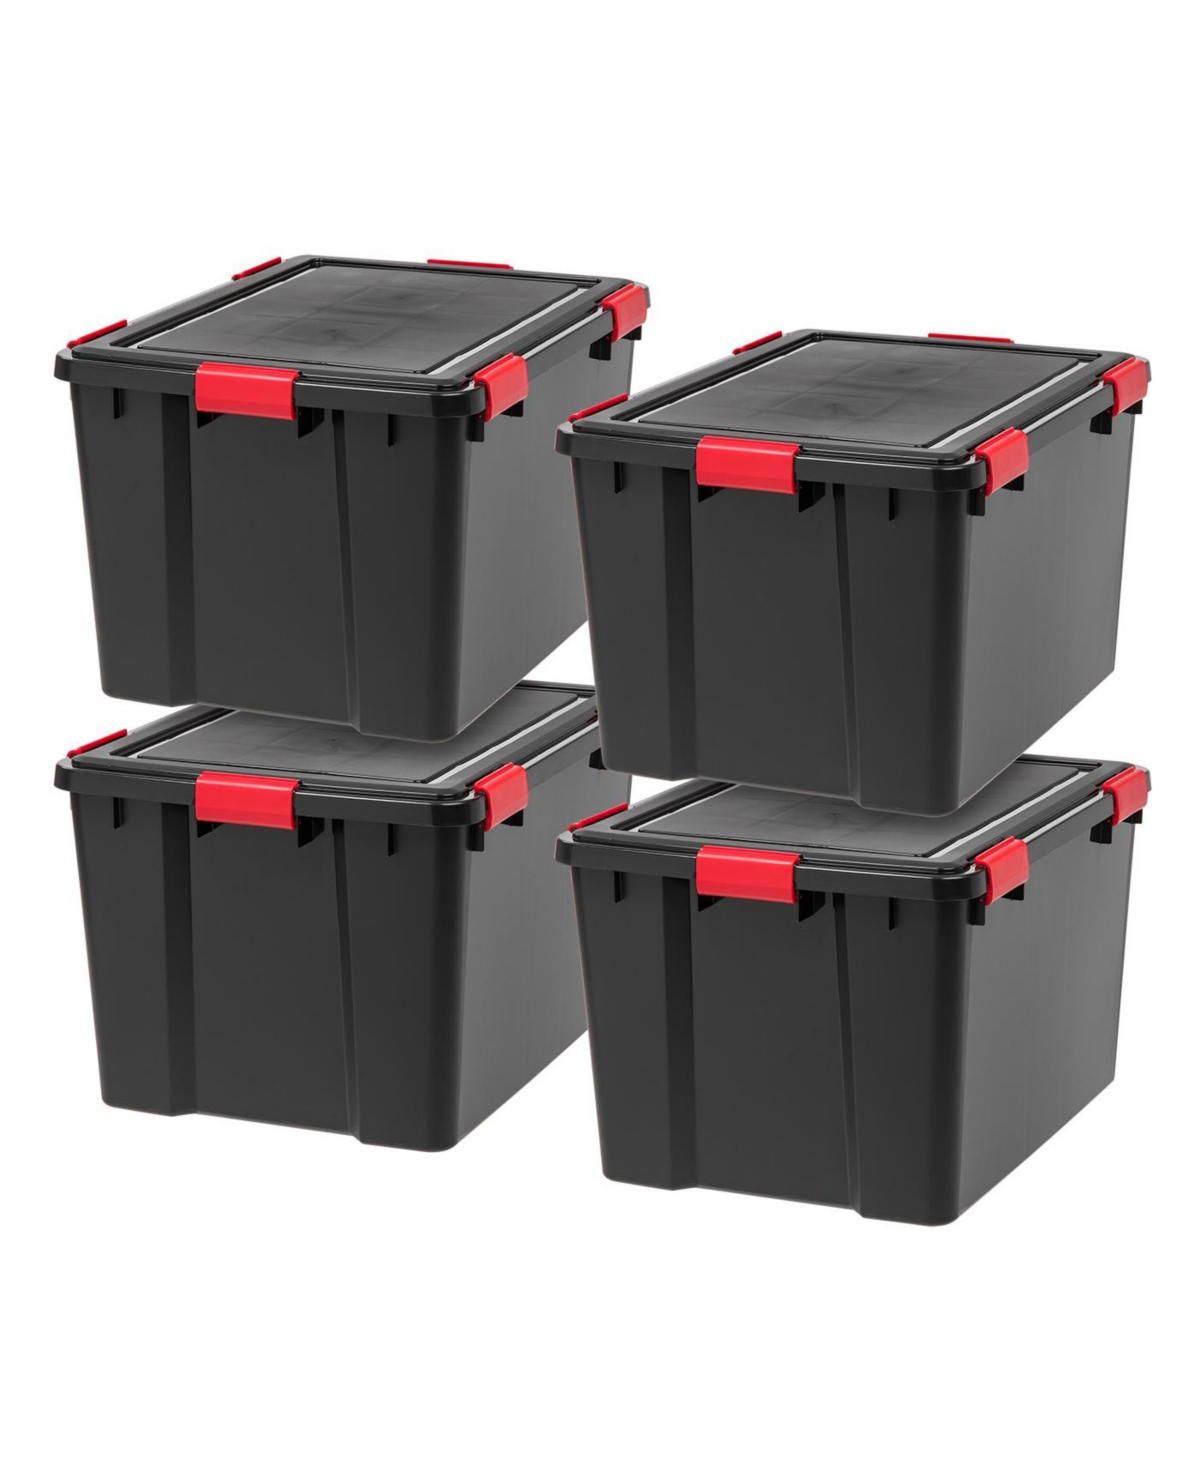 74 Quart WeatherPro Plastic Storage Bin Tote Organizing Container with Durable Lid and Seal and Secure Latching Buckles, 4 Pack - Black